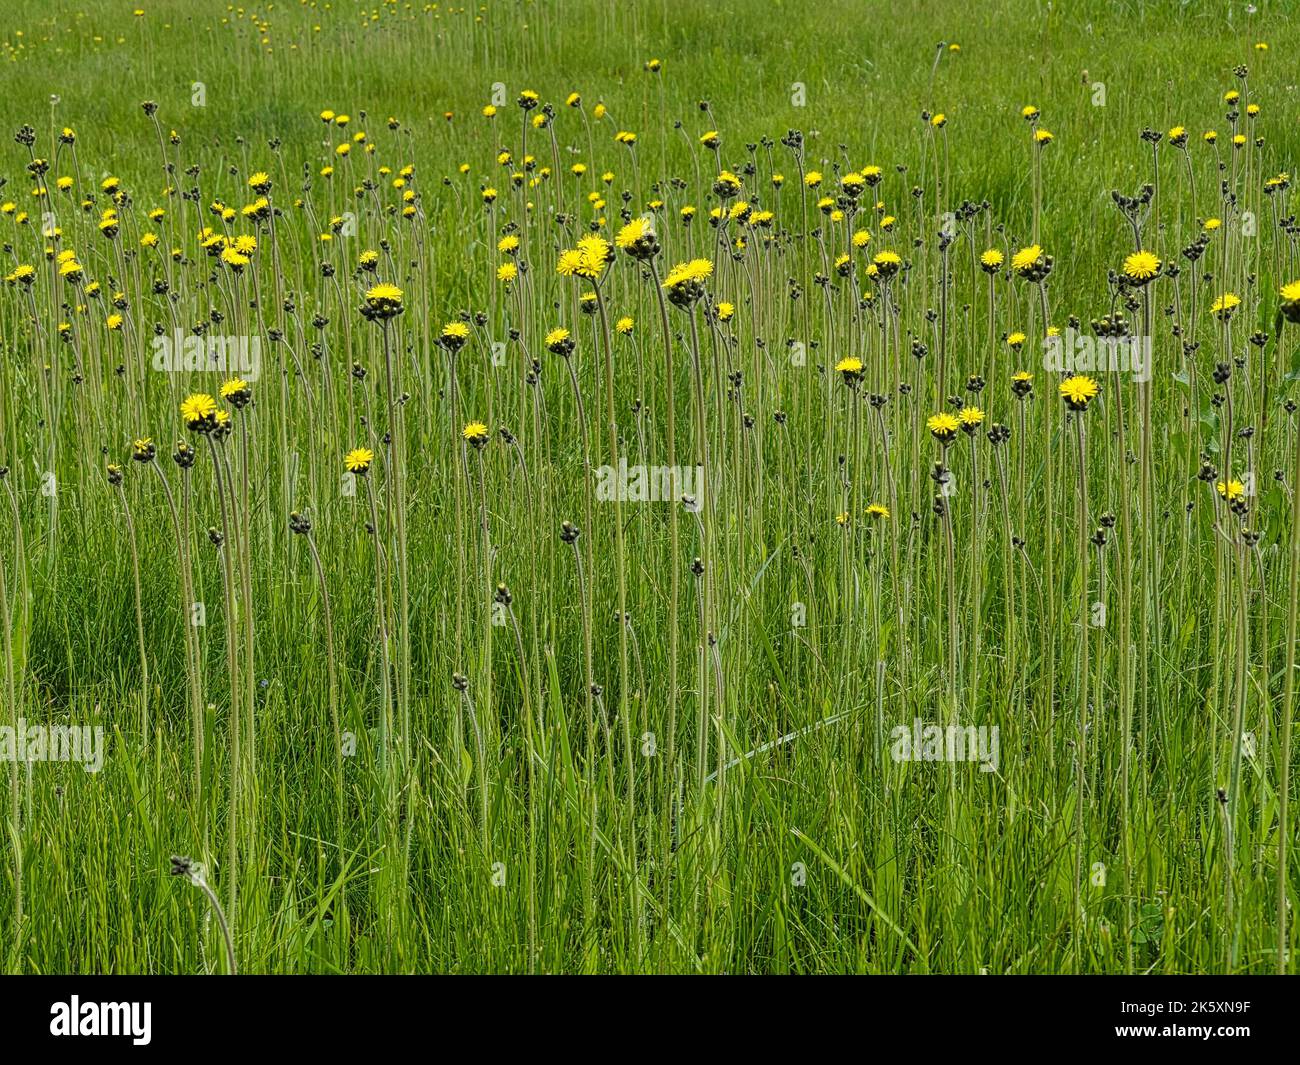 A beautiful view of flatweed flowers in a backyard Stock Photo